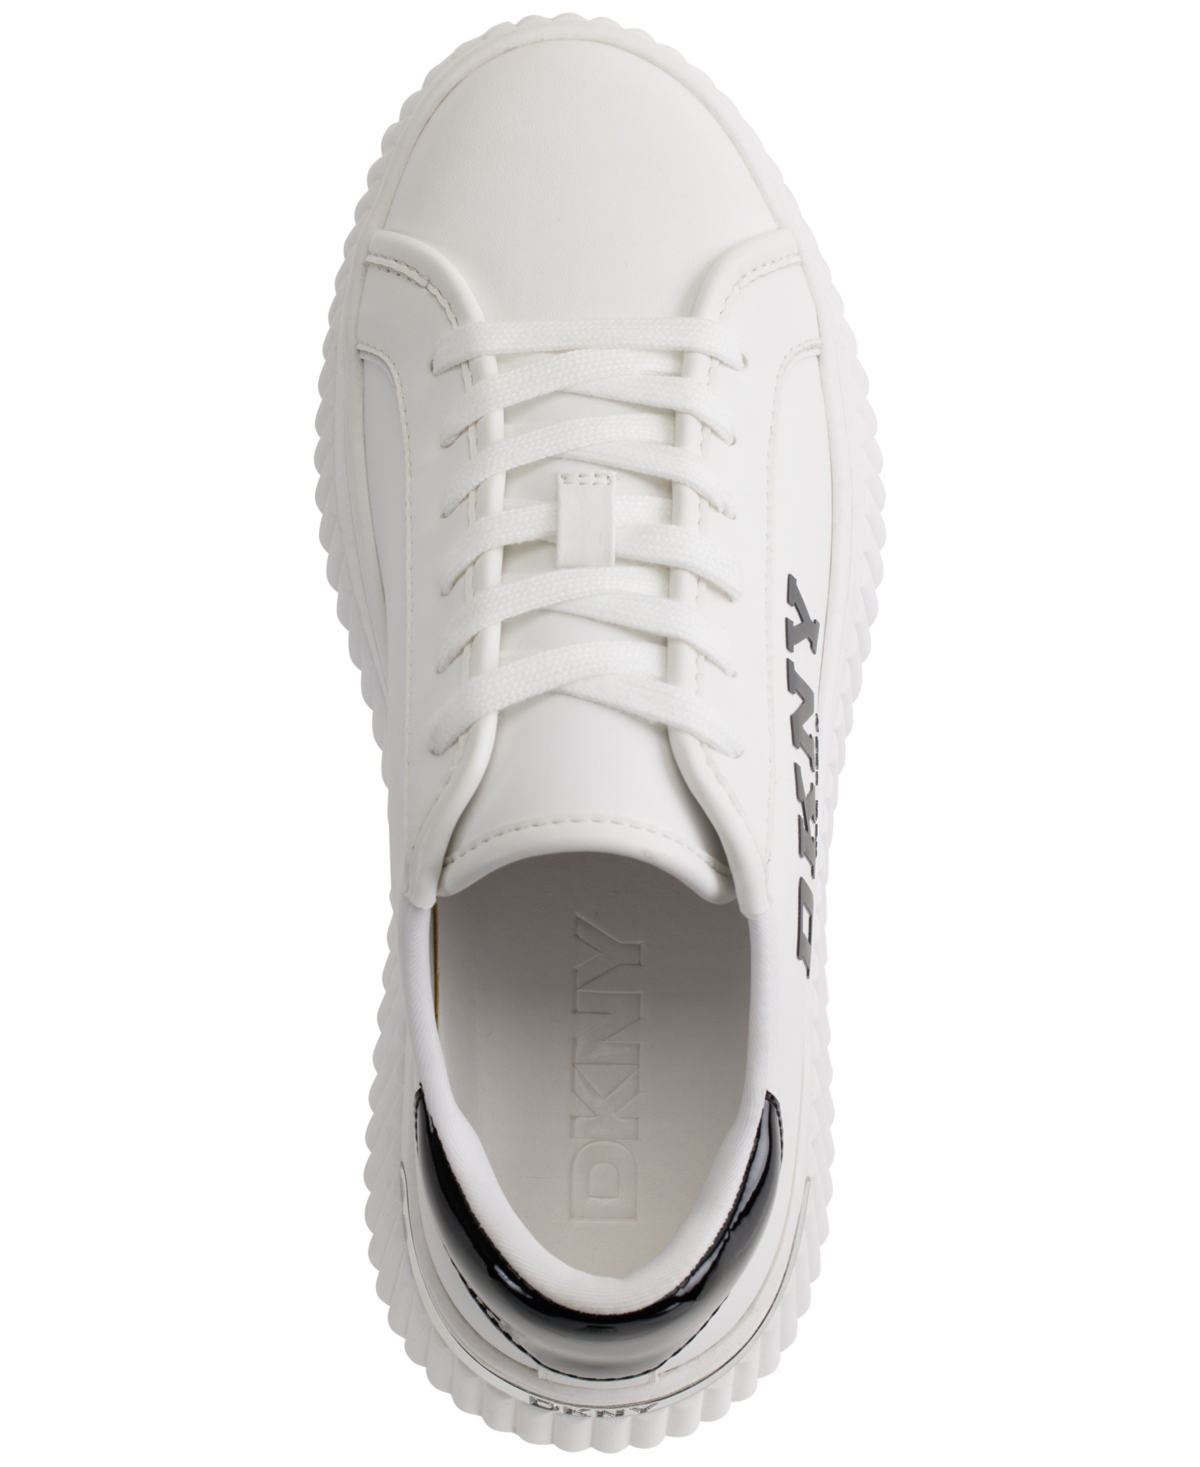 Shop Dkny Women's Leon Lace-up Logo Sneakers In Bright White,black